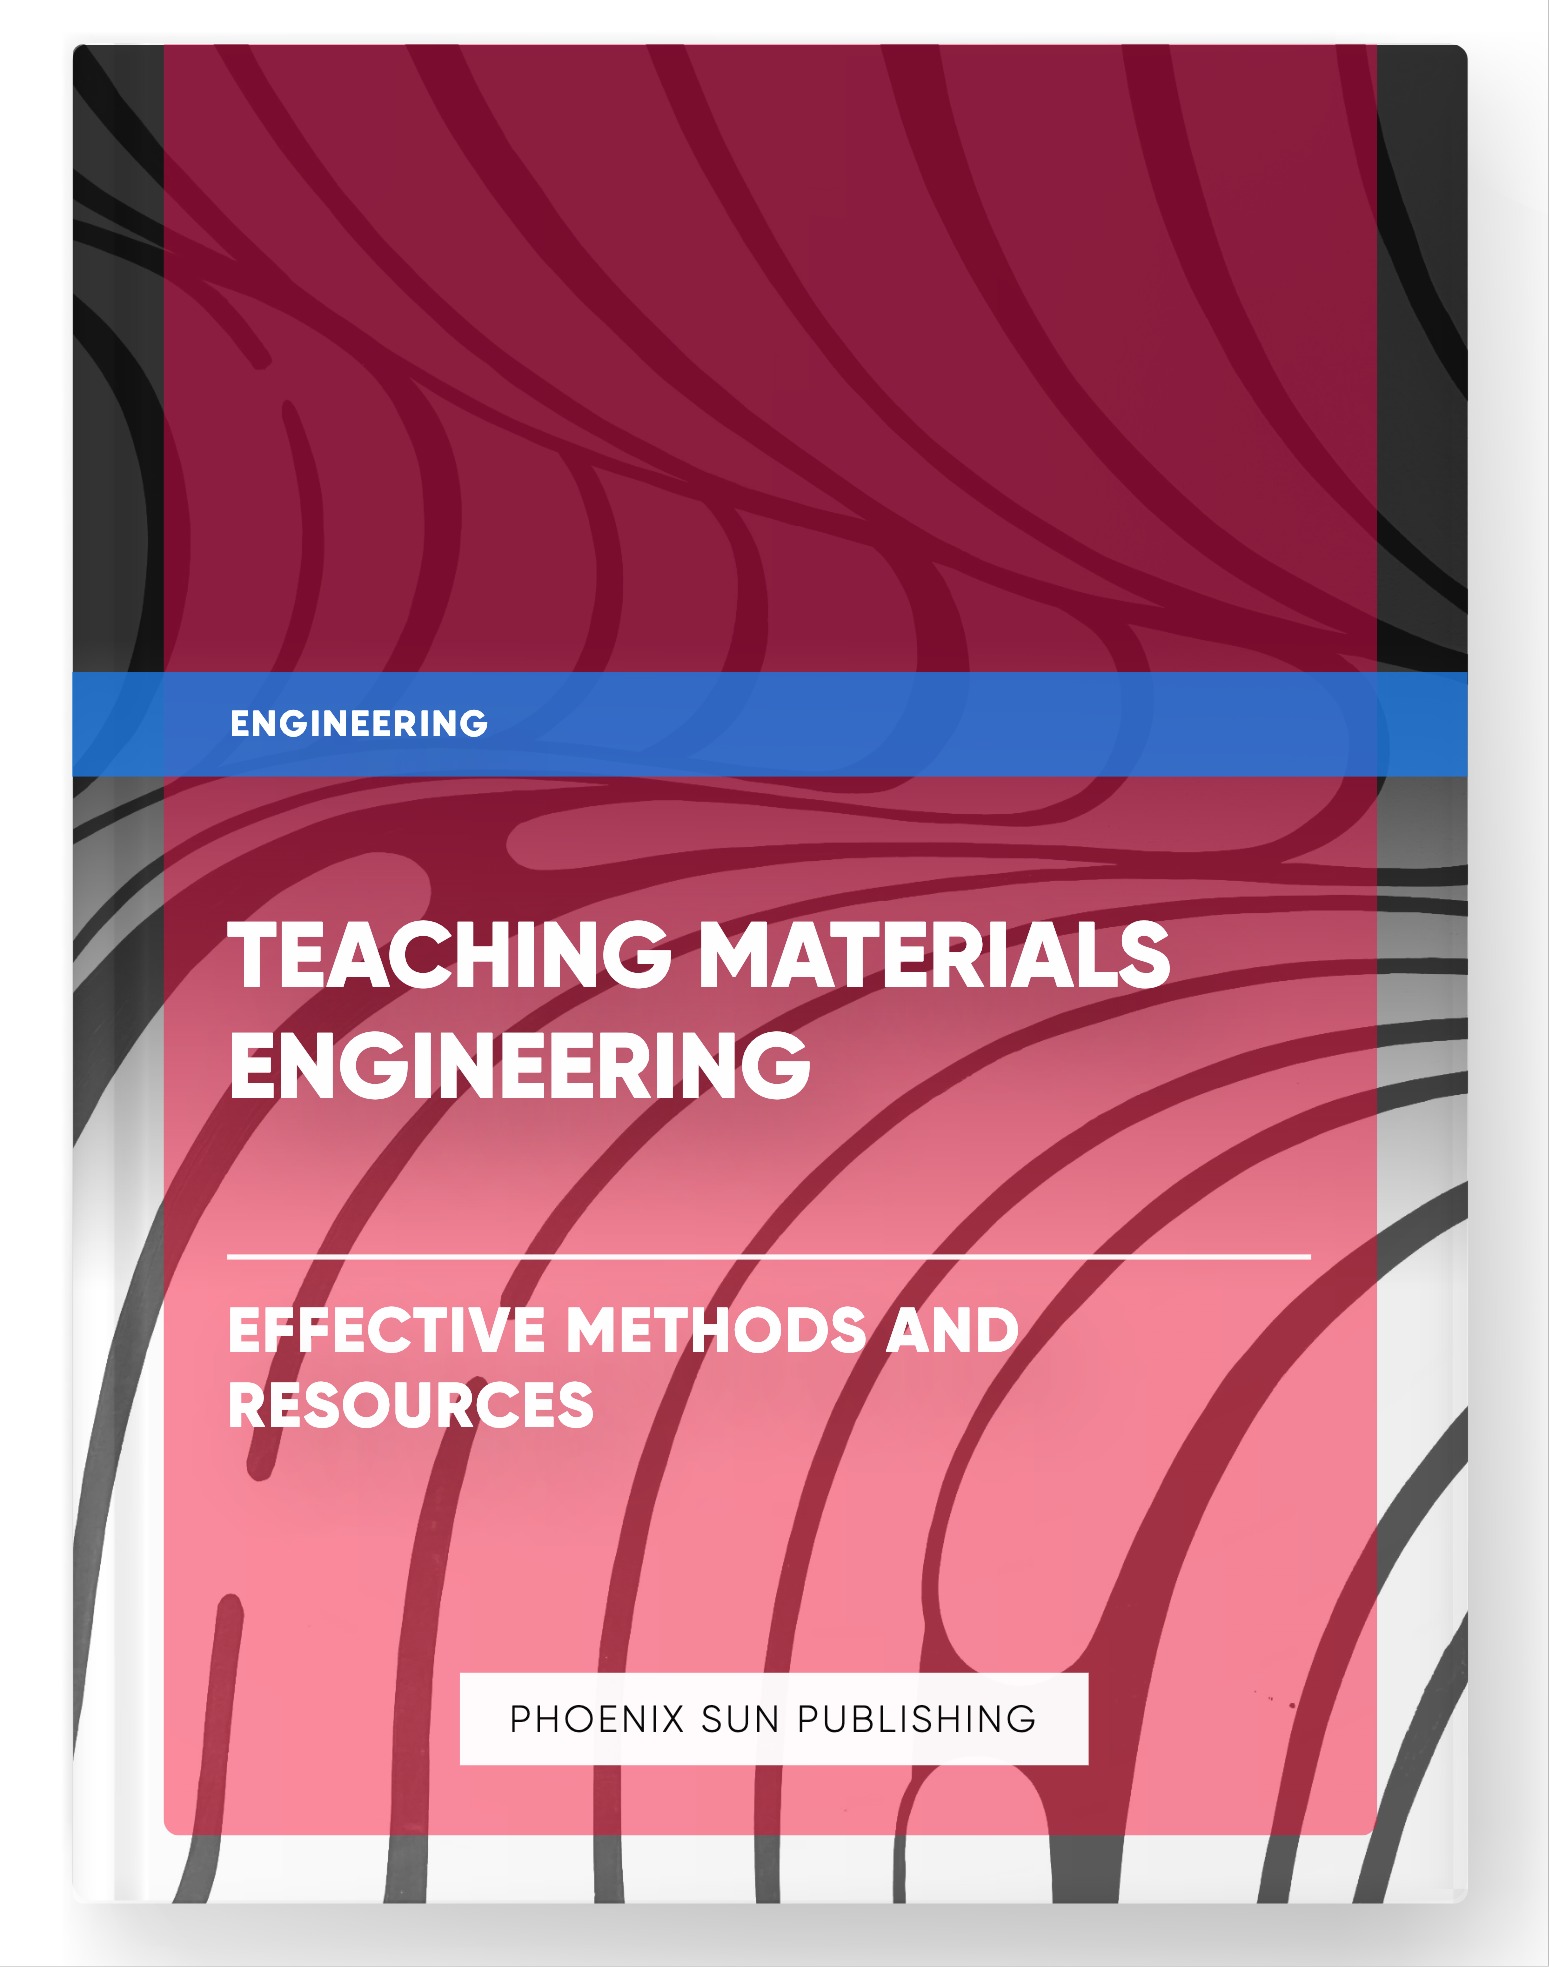 Teaching Materials Engineering – Effective Methods and Resources